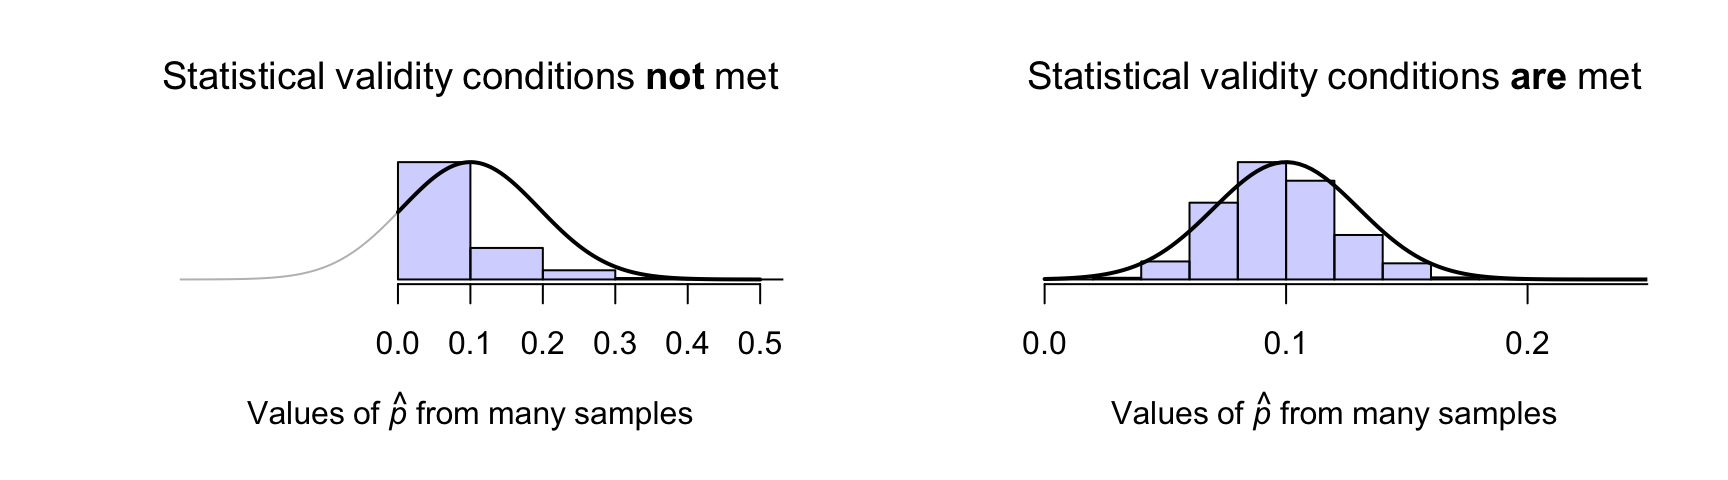 Two proposed sampling distributions. Left: when the statistical validity conditions are not met. Right: when the statistical validity conditions are met.